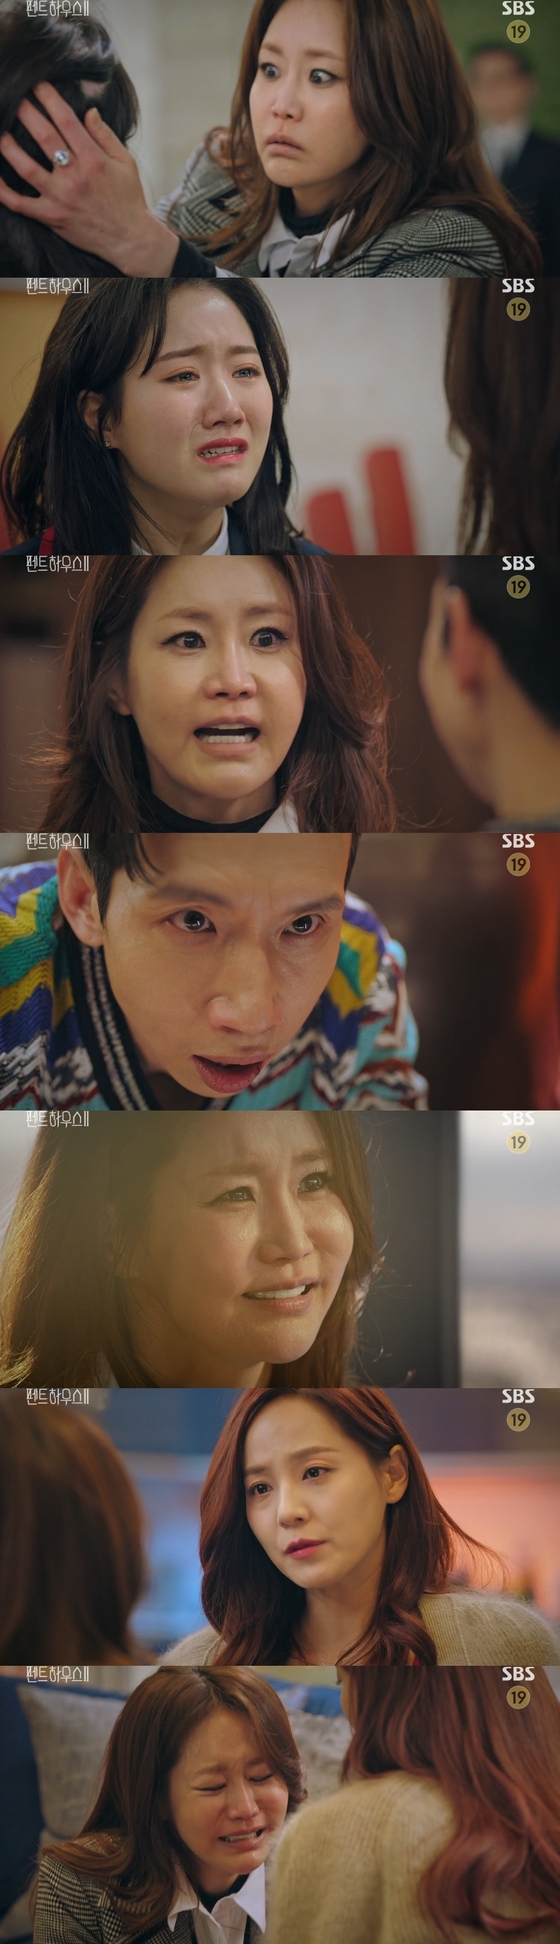 [RE:TV] “I don’t know if I don’t suffer”‘Penha 2’Shin Eun-kyung, Jin Ji-hee apologizes for tears after being victimized